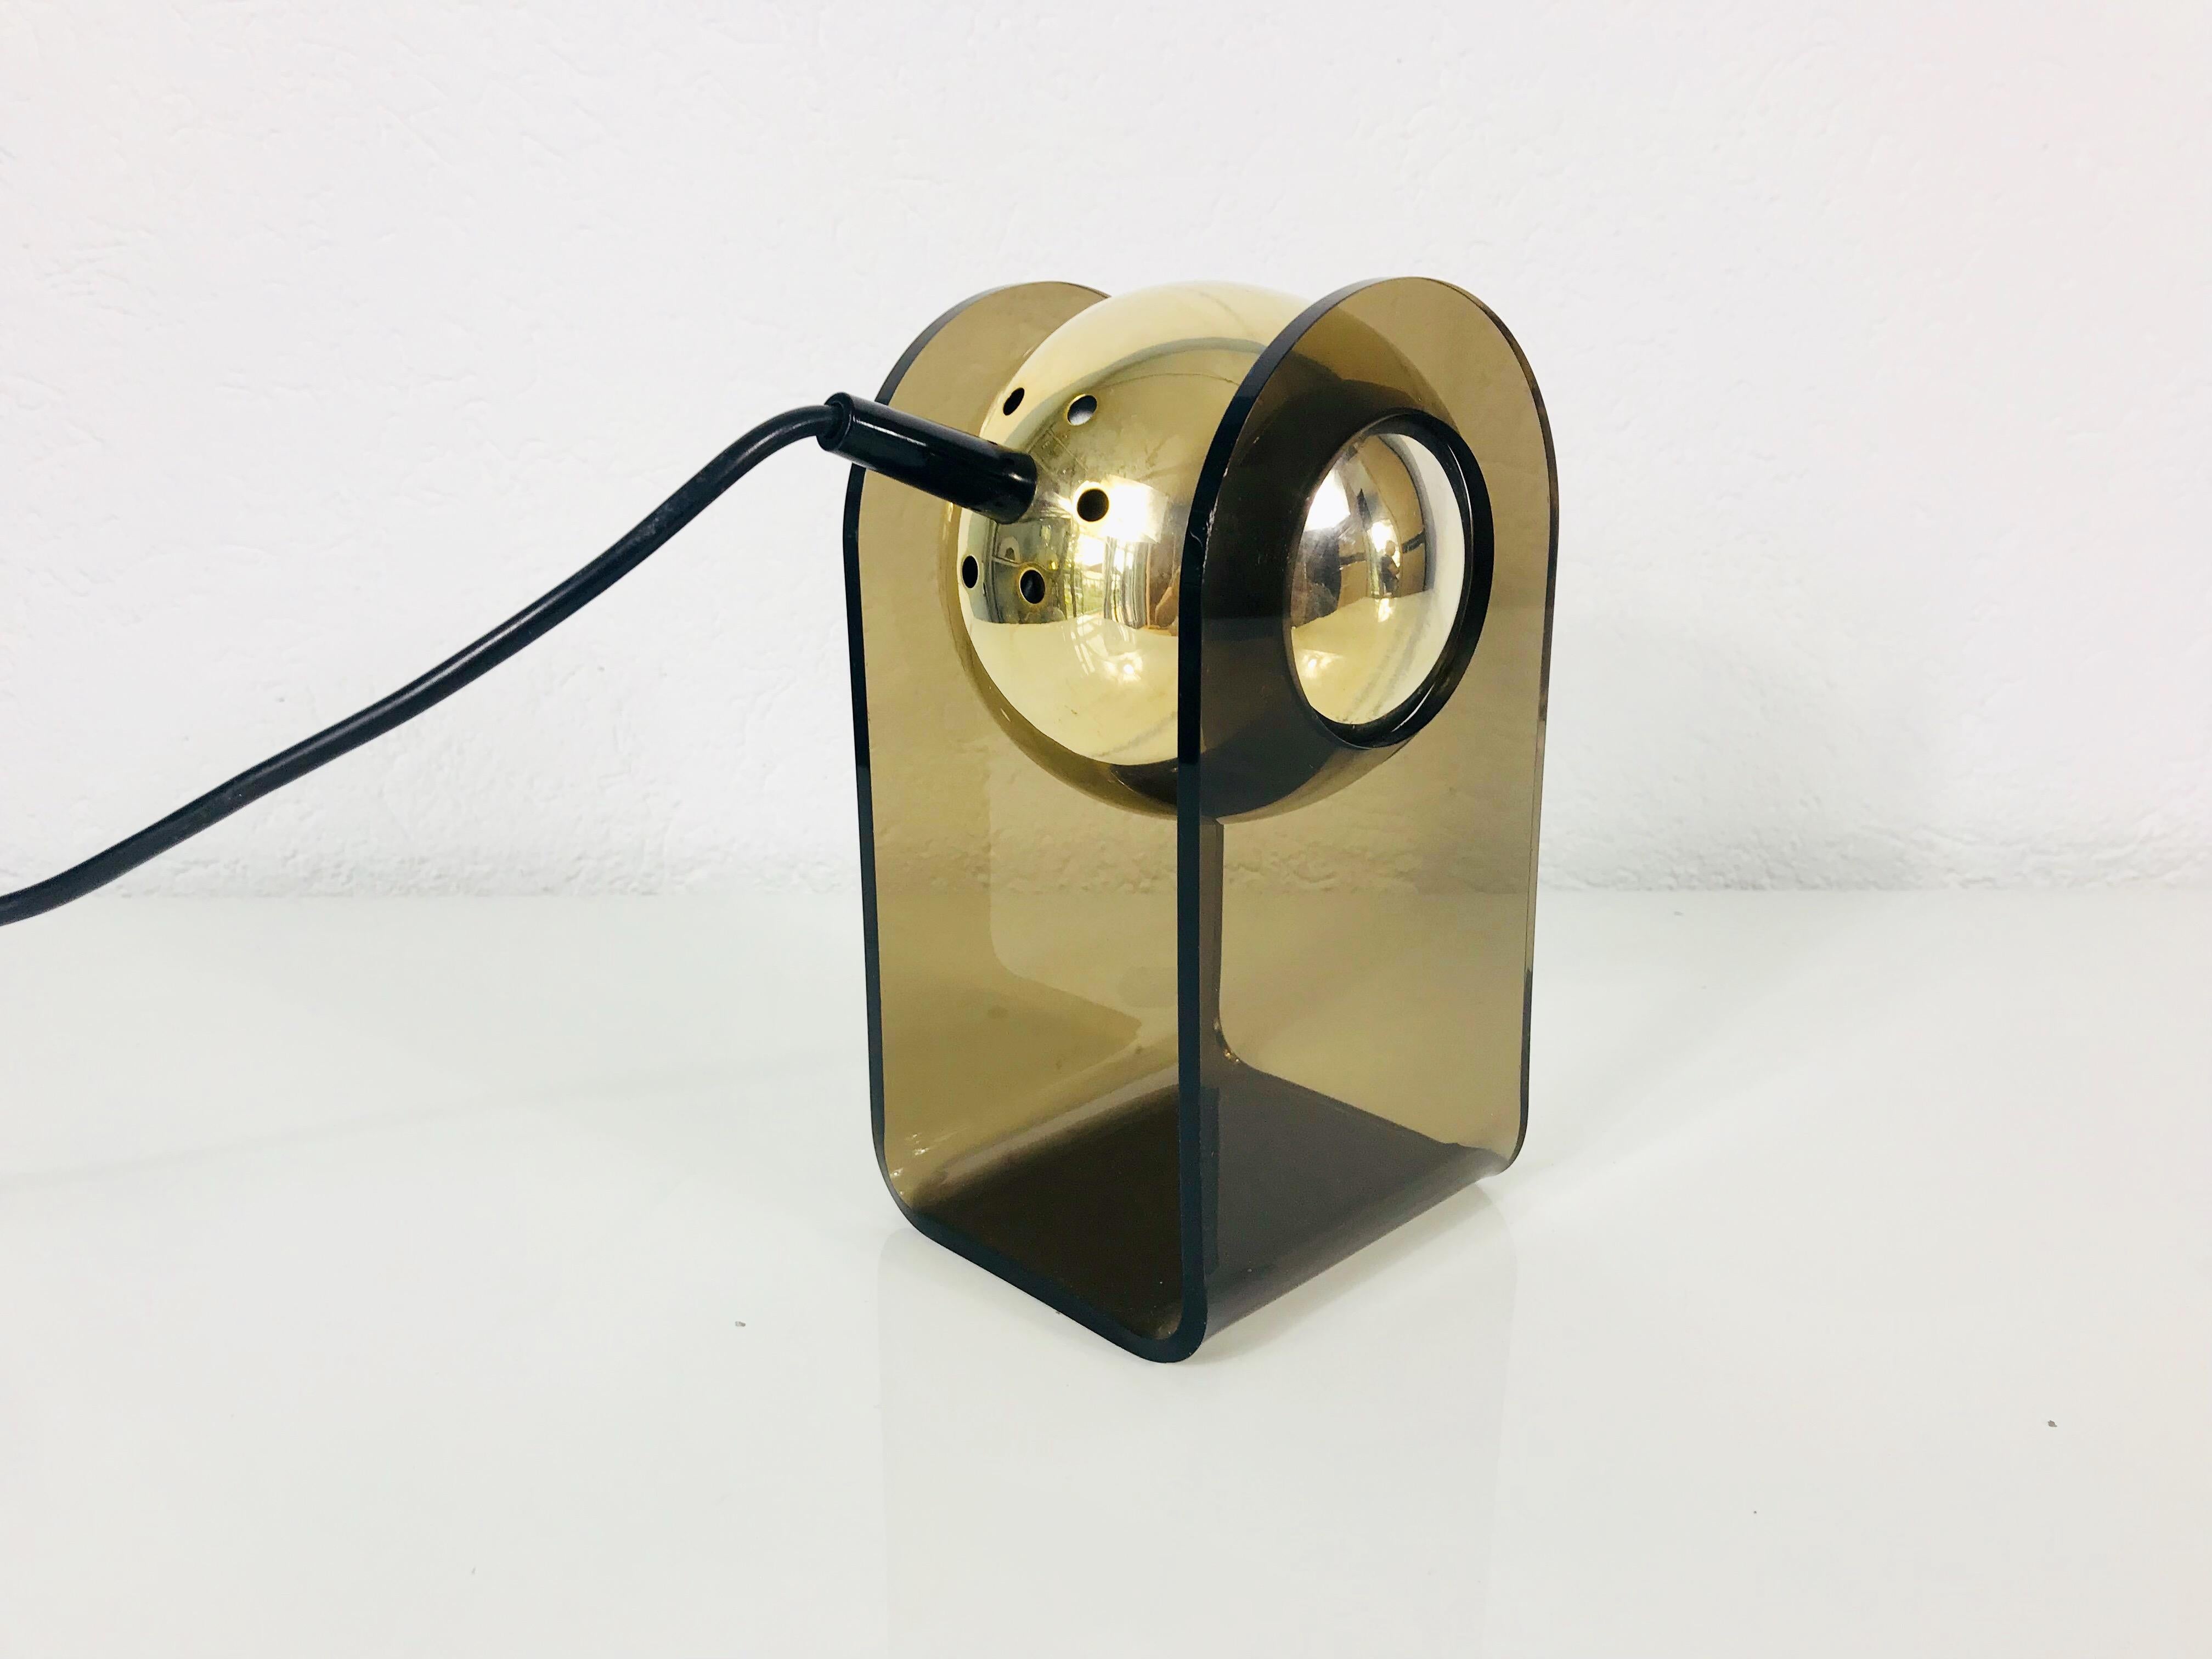 A beautiful midcentury table lamps designed by Gino Sarfatti for Arteluce in 1968. It is fascinating with its beautiful brown shade and plexiglass body. The lamps are in very good vintage condition and work perfectly. The head of the lamp is